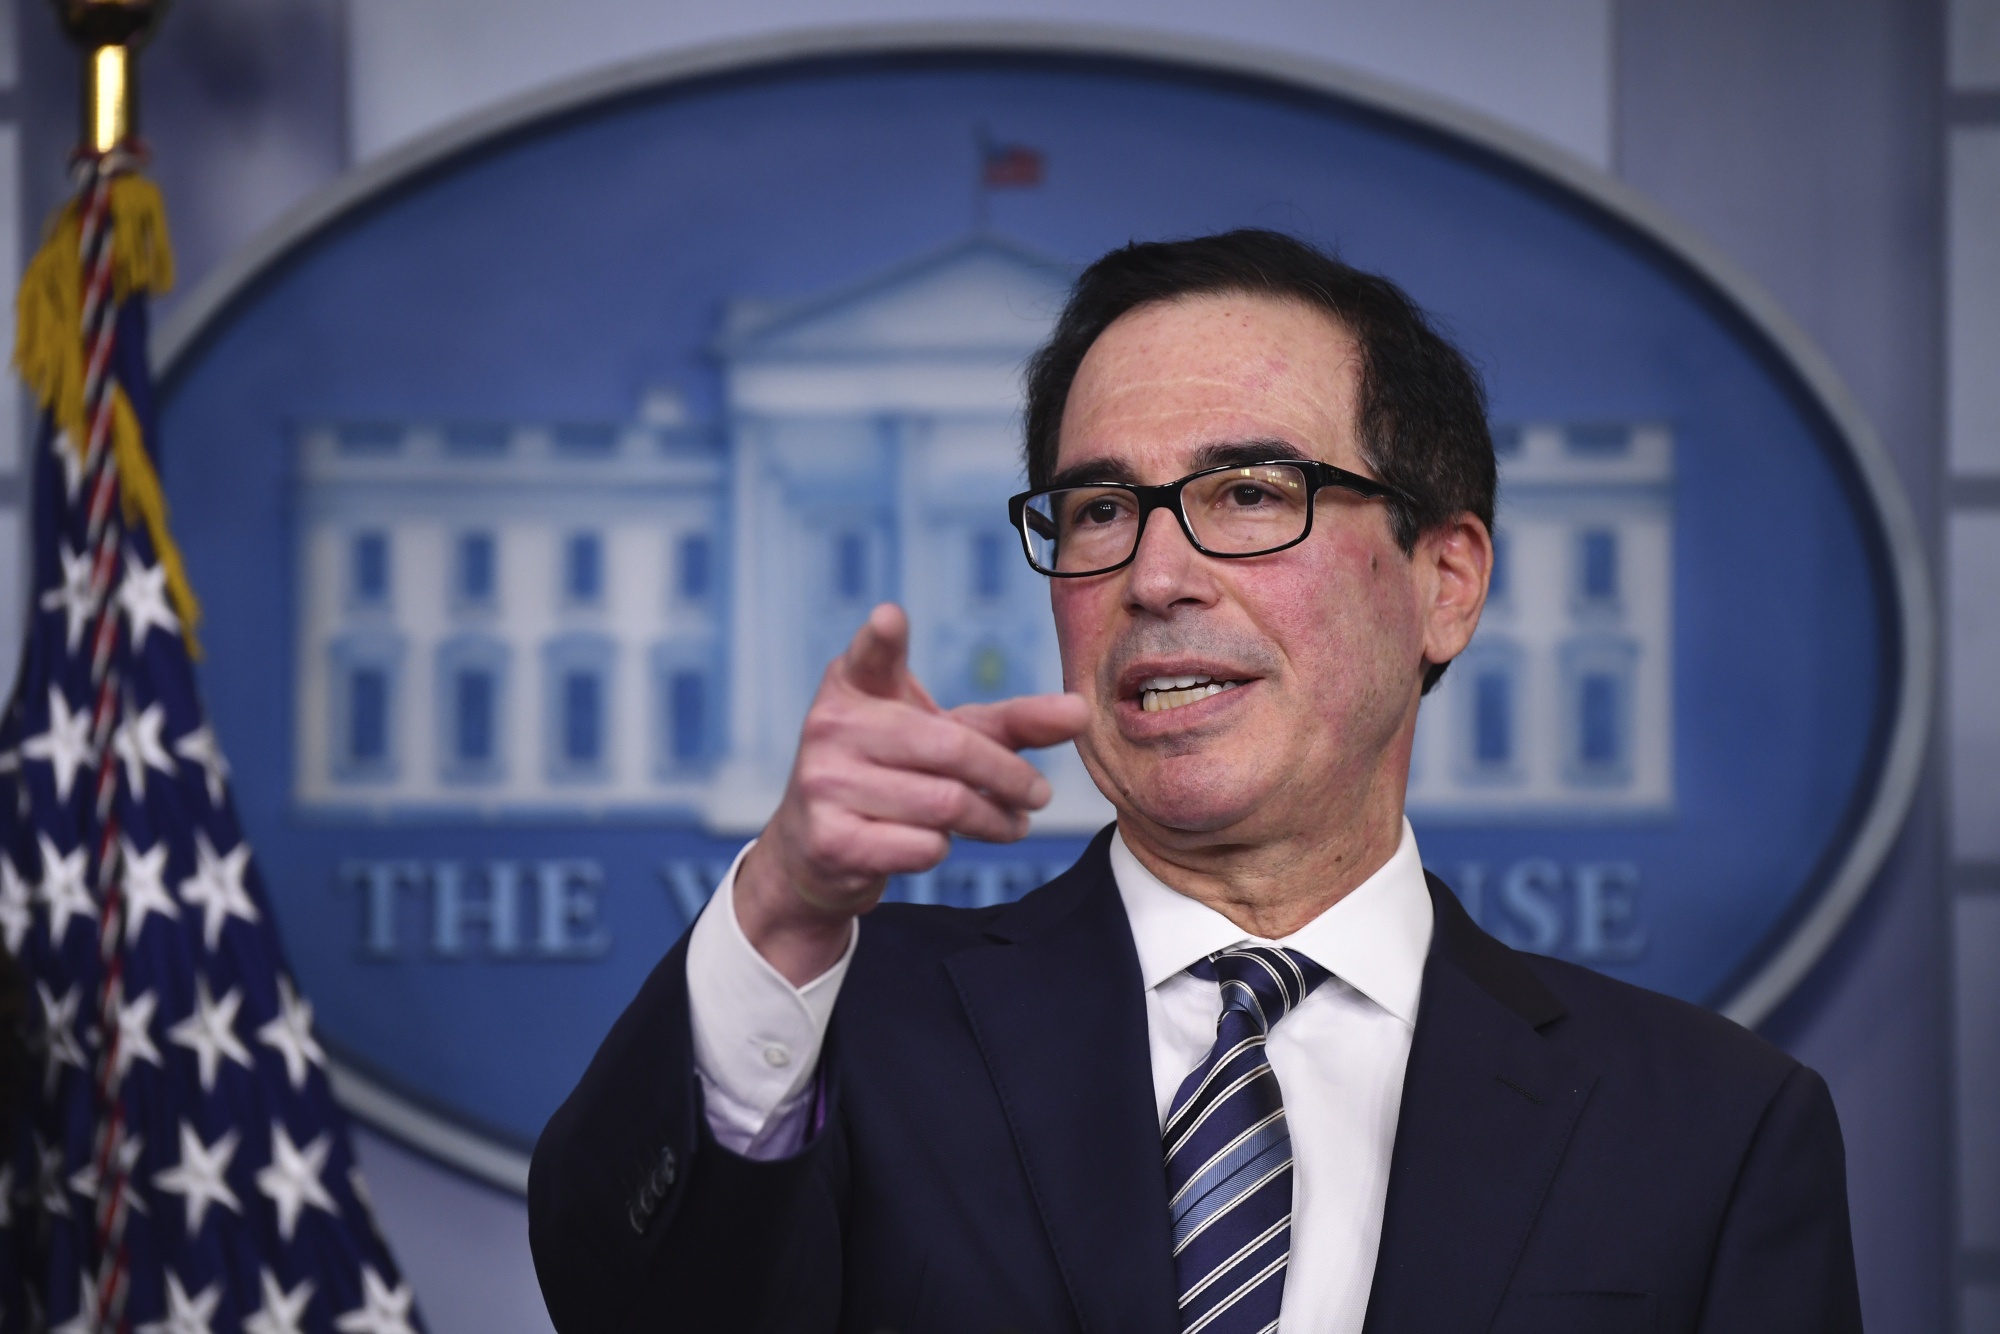 Steven Mnuchin, U.S. Treasury secretary, speaks during a news conference at the White House in Washington on April 2, 2020.&nbsp;